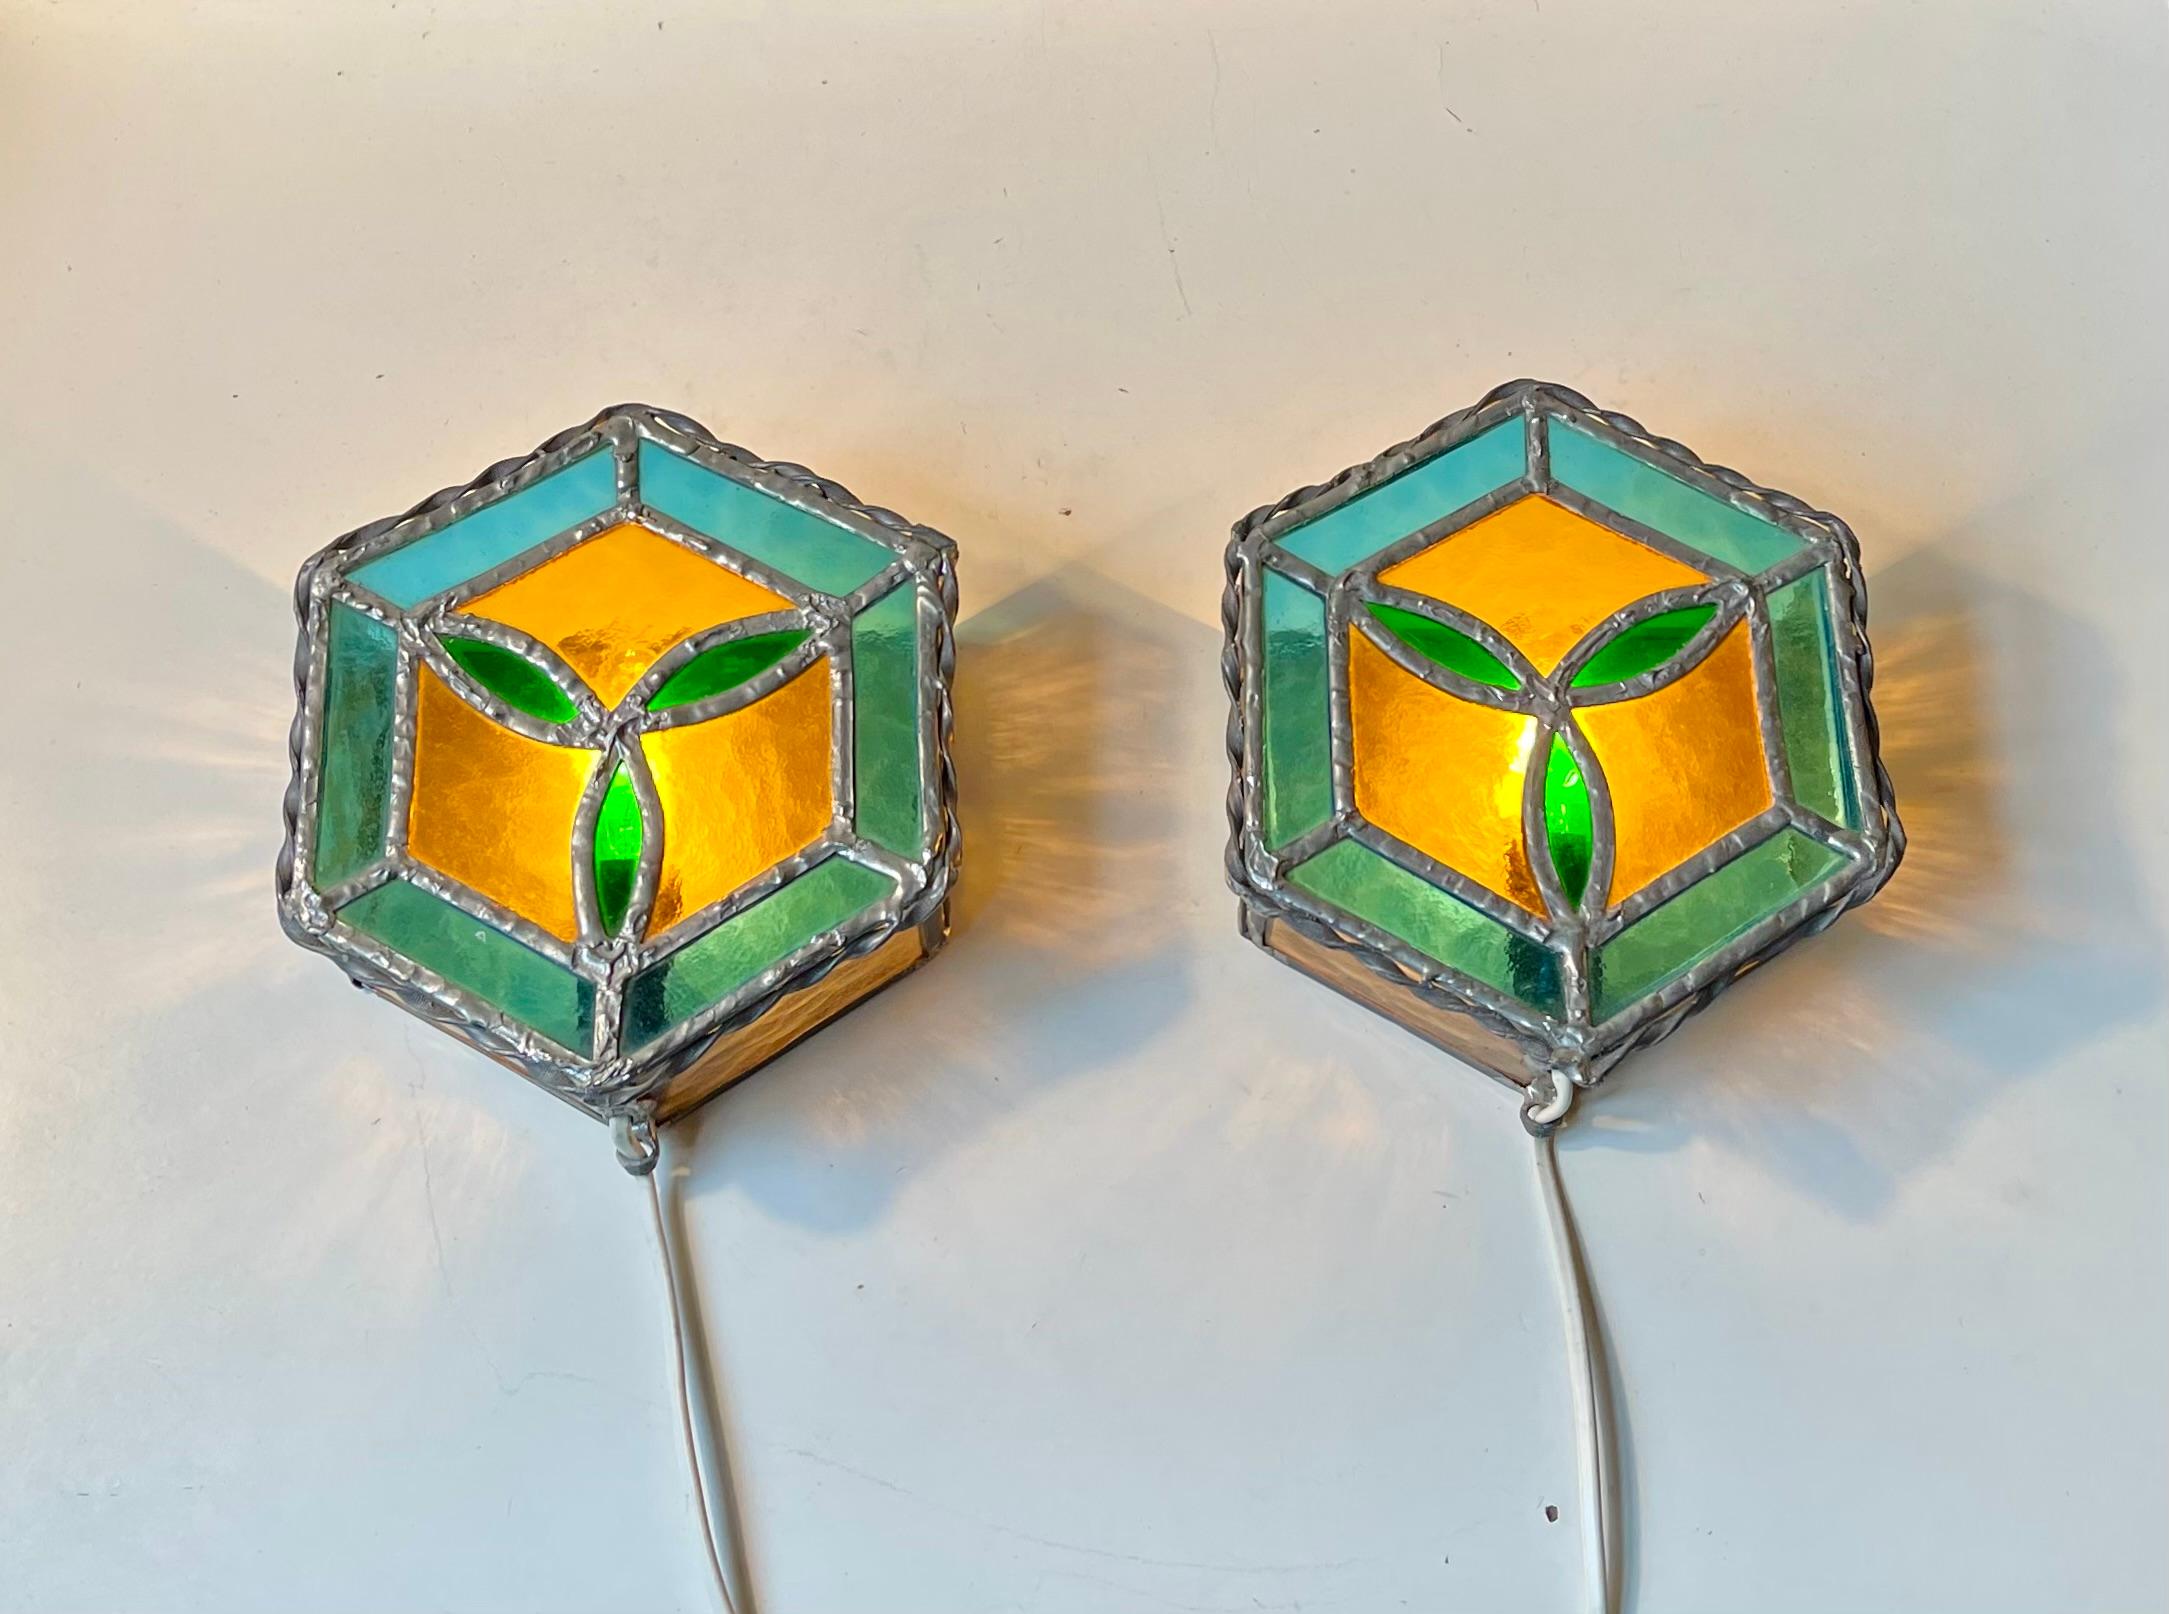 Gothic Revival Vintage Scandinavian Gothic Style Stained Glass Wall Sconces For Sale